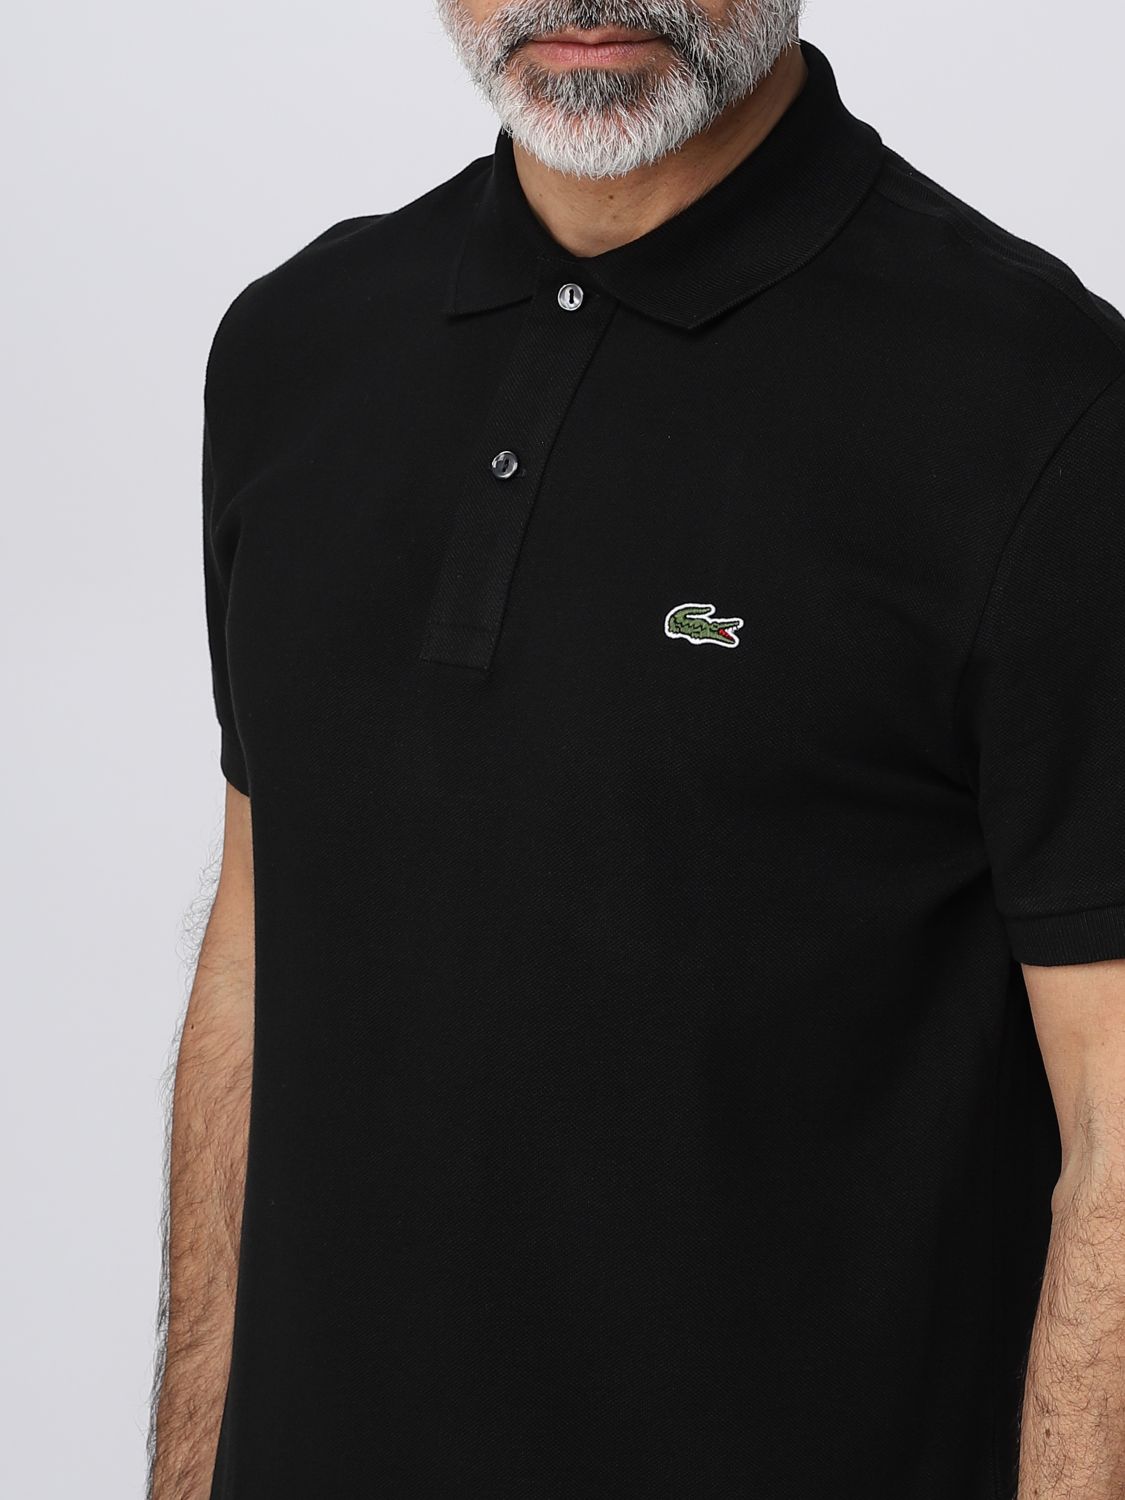 Diplomatie silhouet Toeschouwer LACOSTE: polo shirt for men - Black | Lacoste polo shirt PH4012 online on  GIGLIO.COM